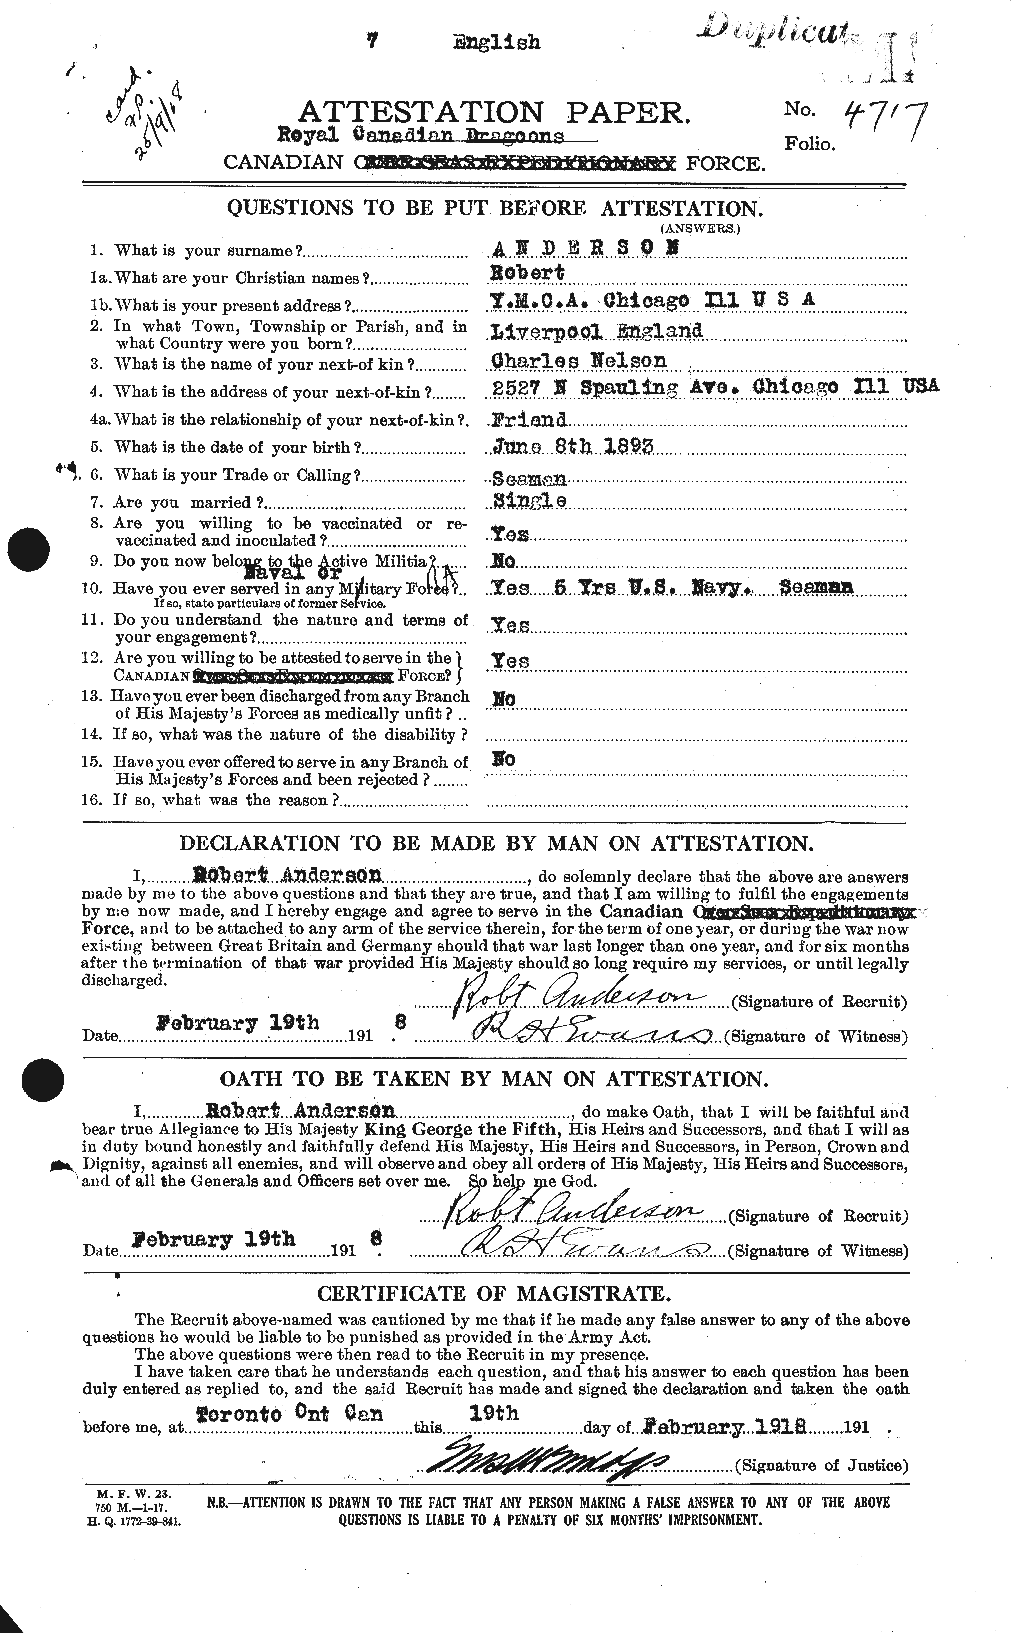 Personnel Records of the First World War - CEF 207290a